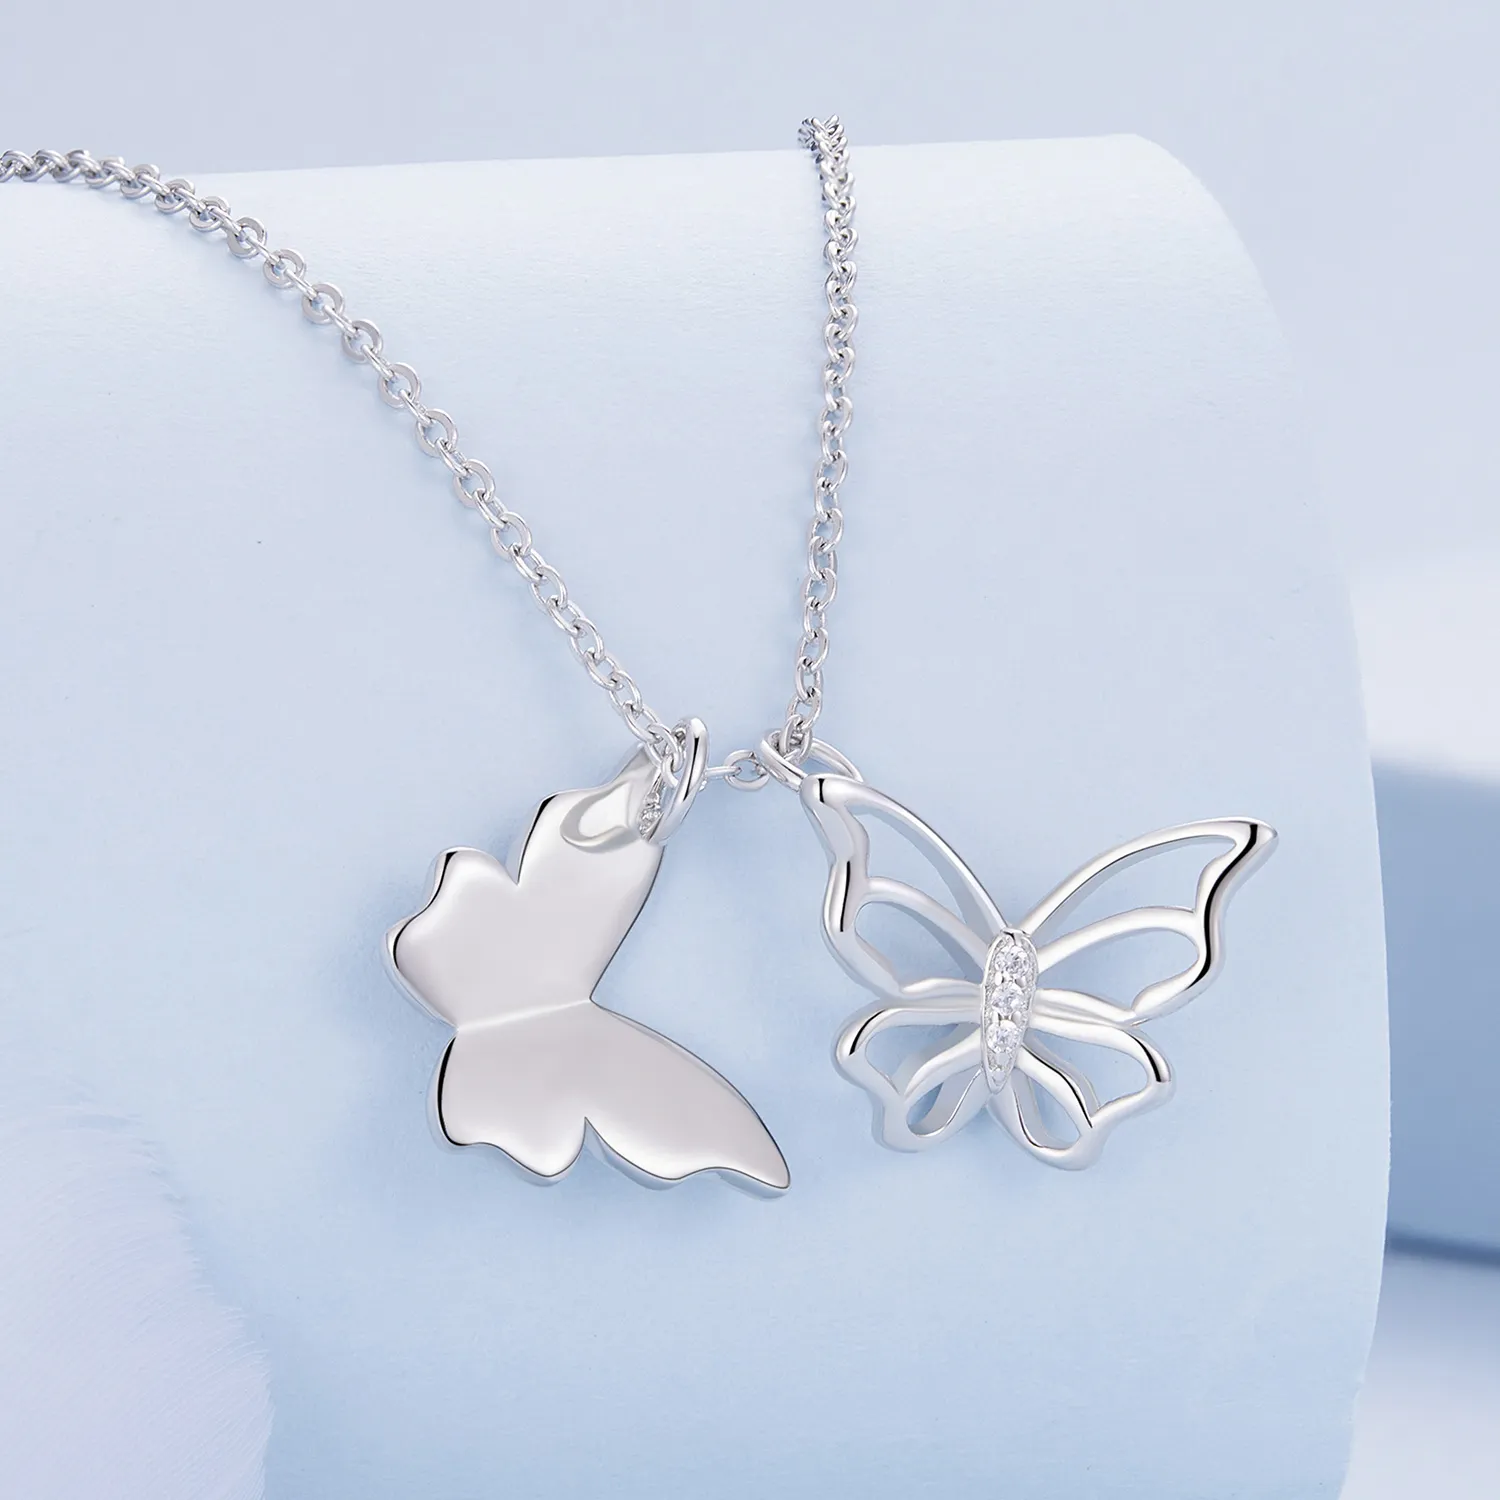 Pandora Style Butterfly Necklace - BSN321